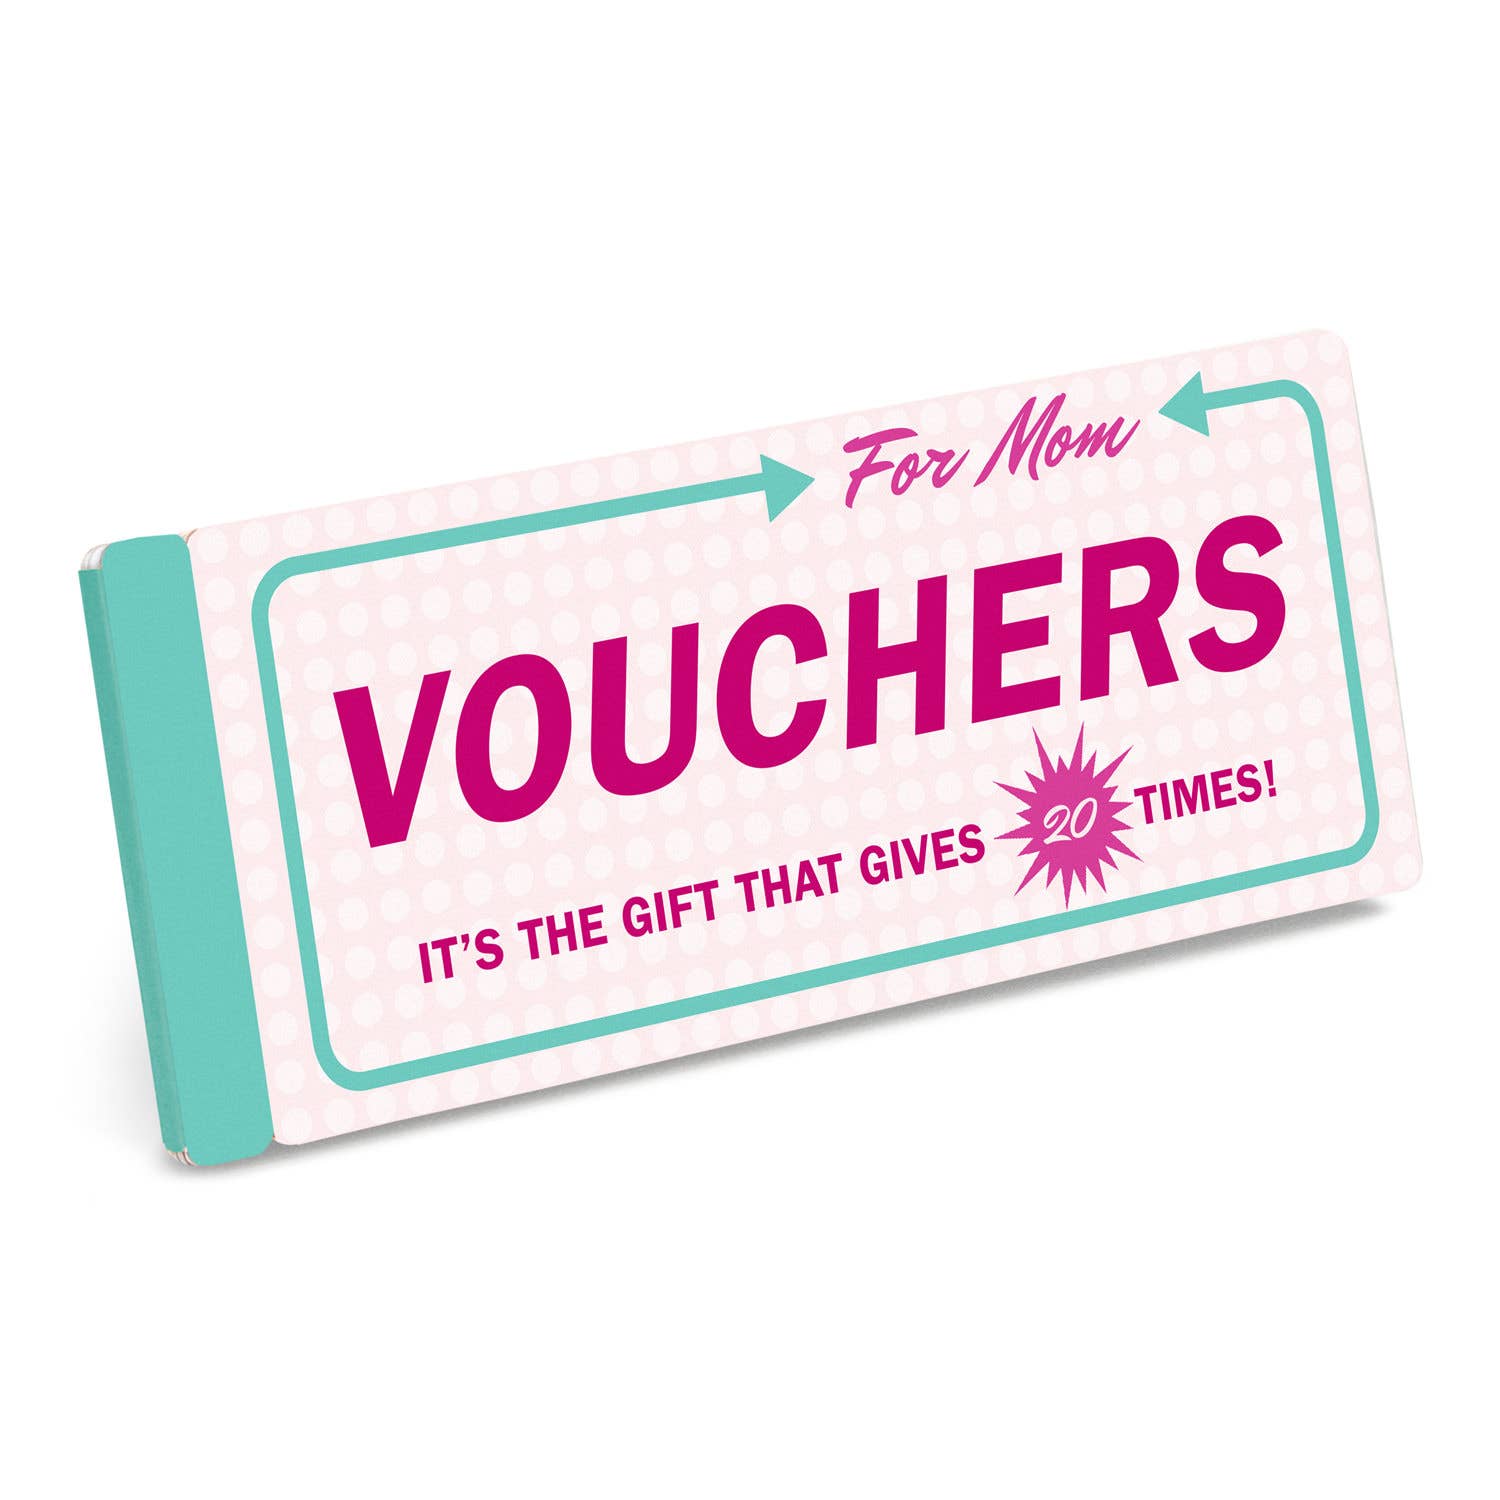 Vouchers for Mom - Spiral Circle